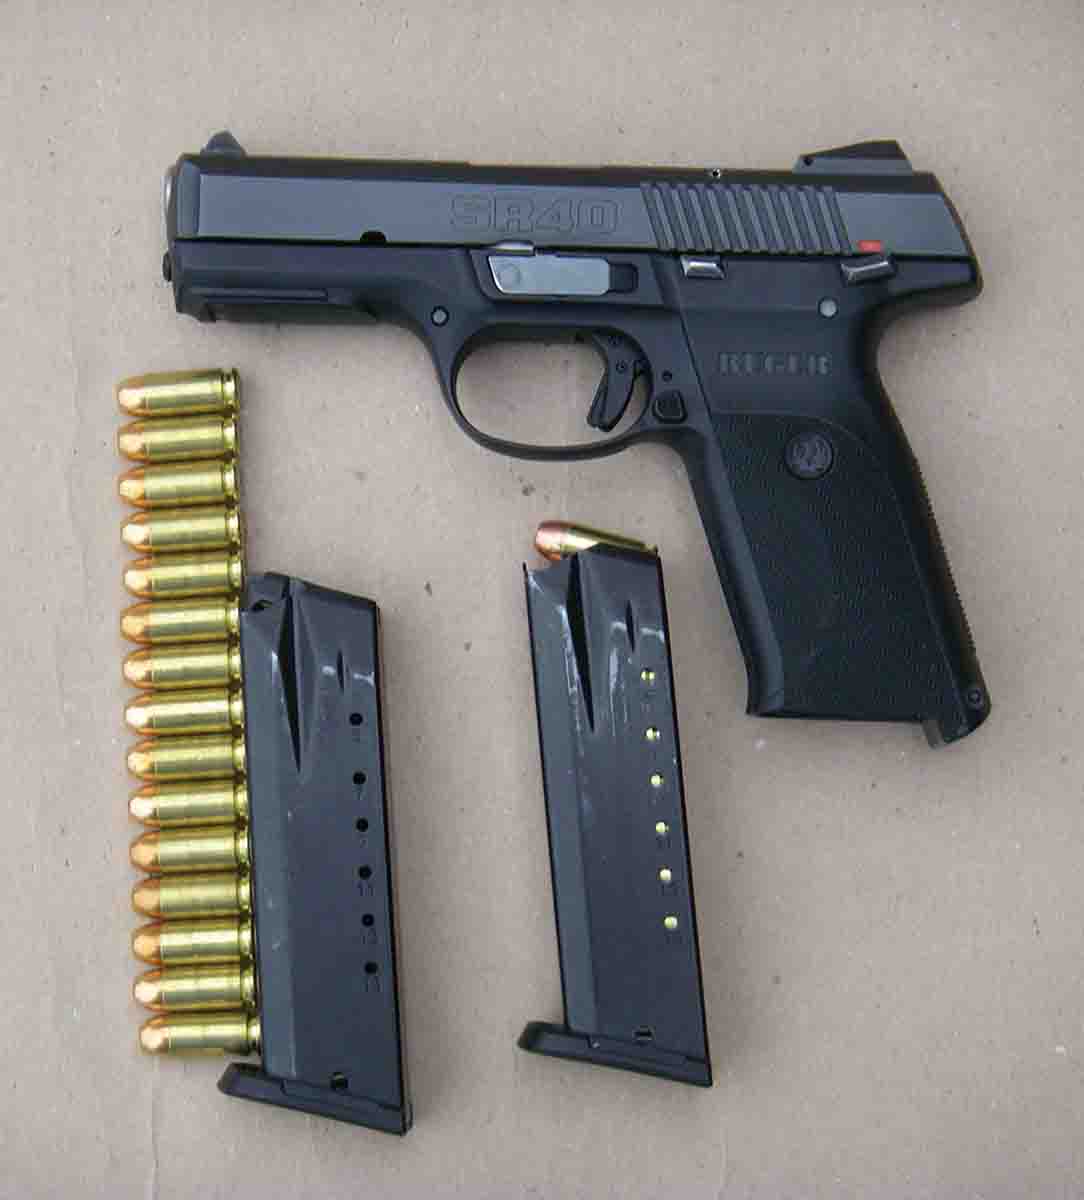 The SR40 comes standard with two 15-round magazines.